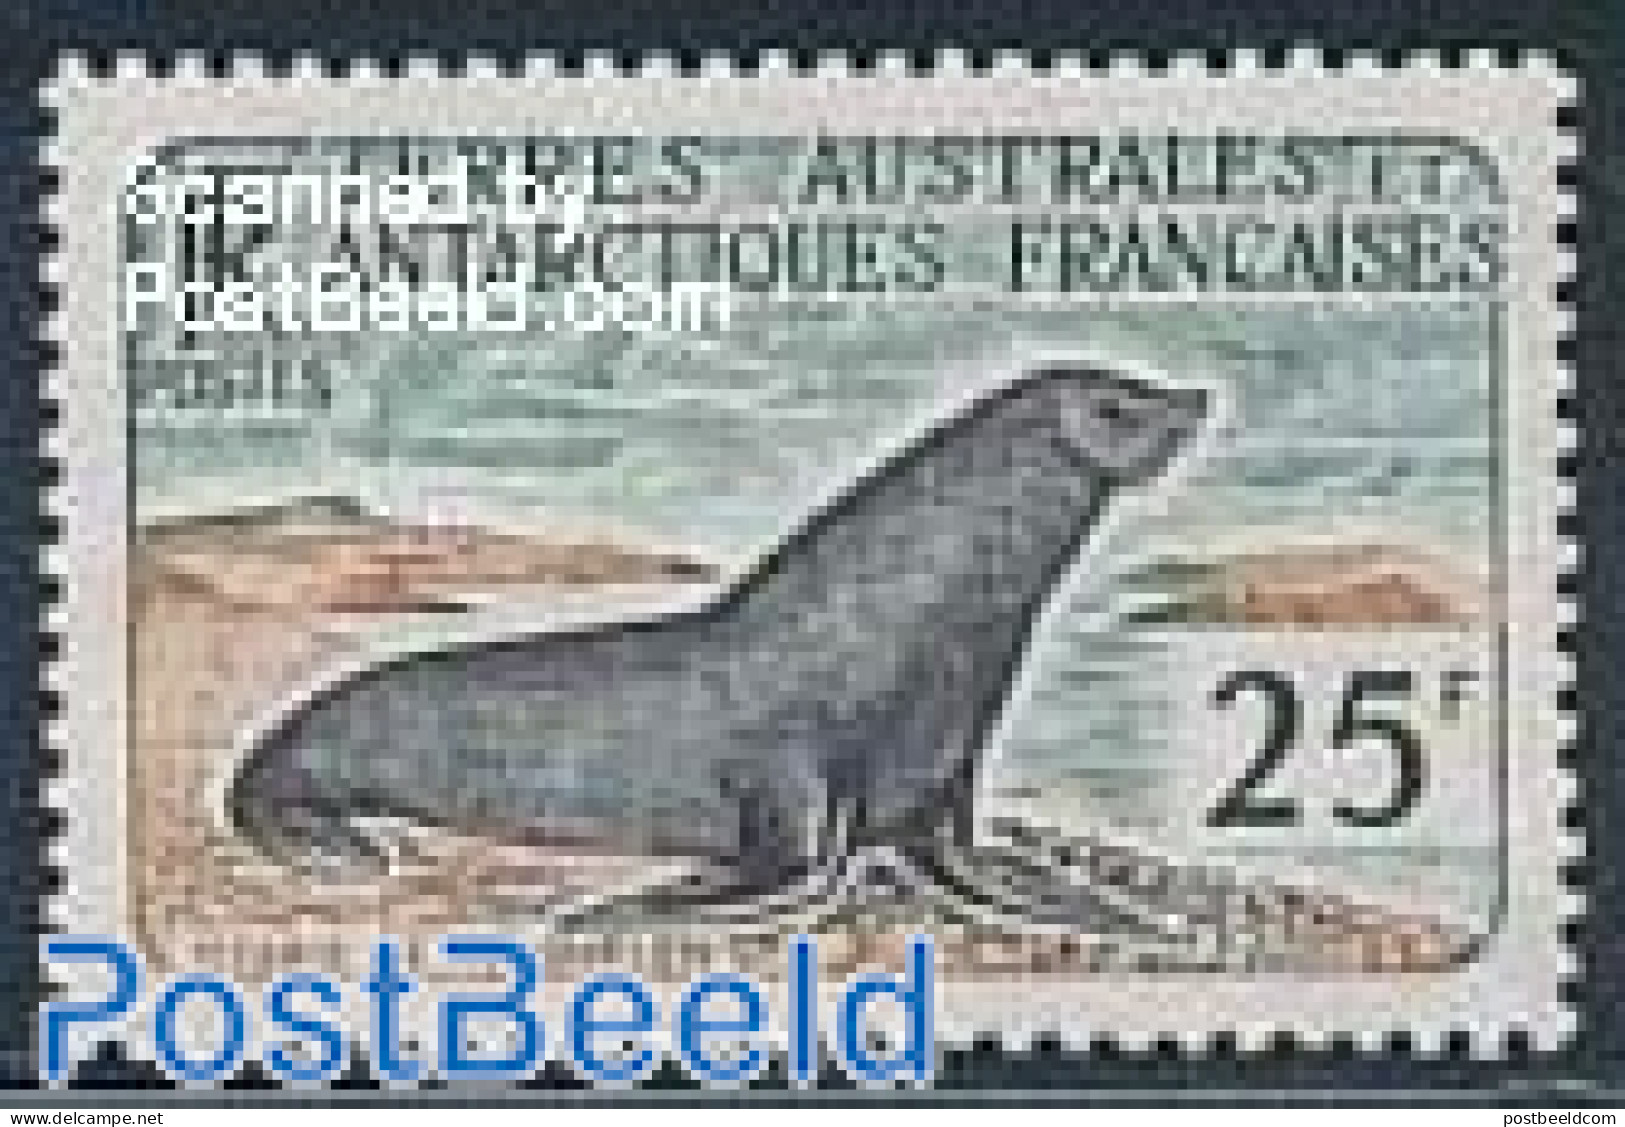 French Antarctic Territory 1960 25Fr, Stamp Out Of Set, Unused (hinged), Nature - Unused Stamps